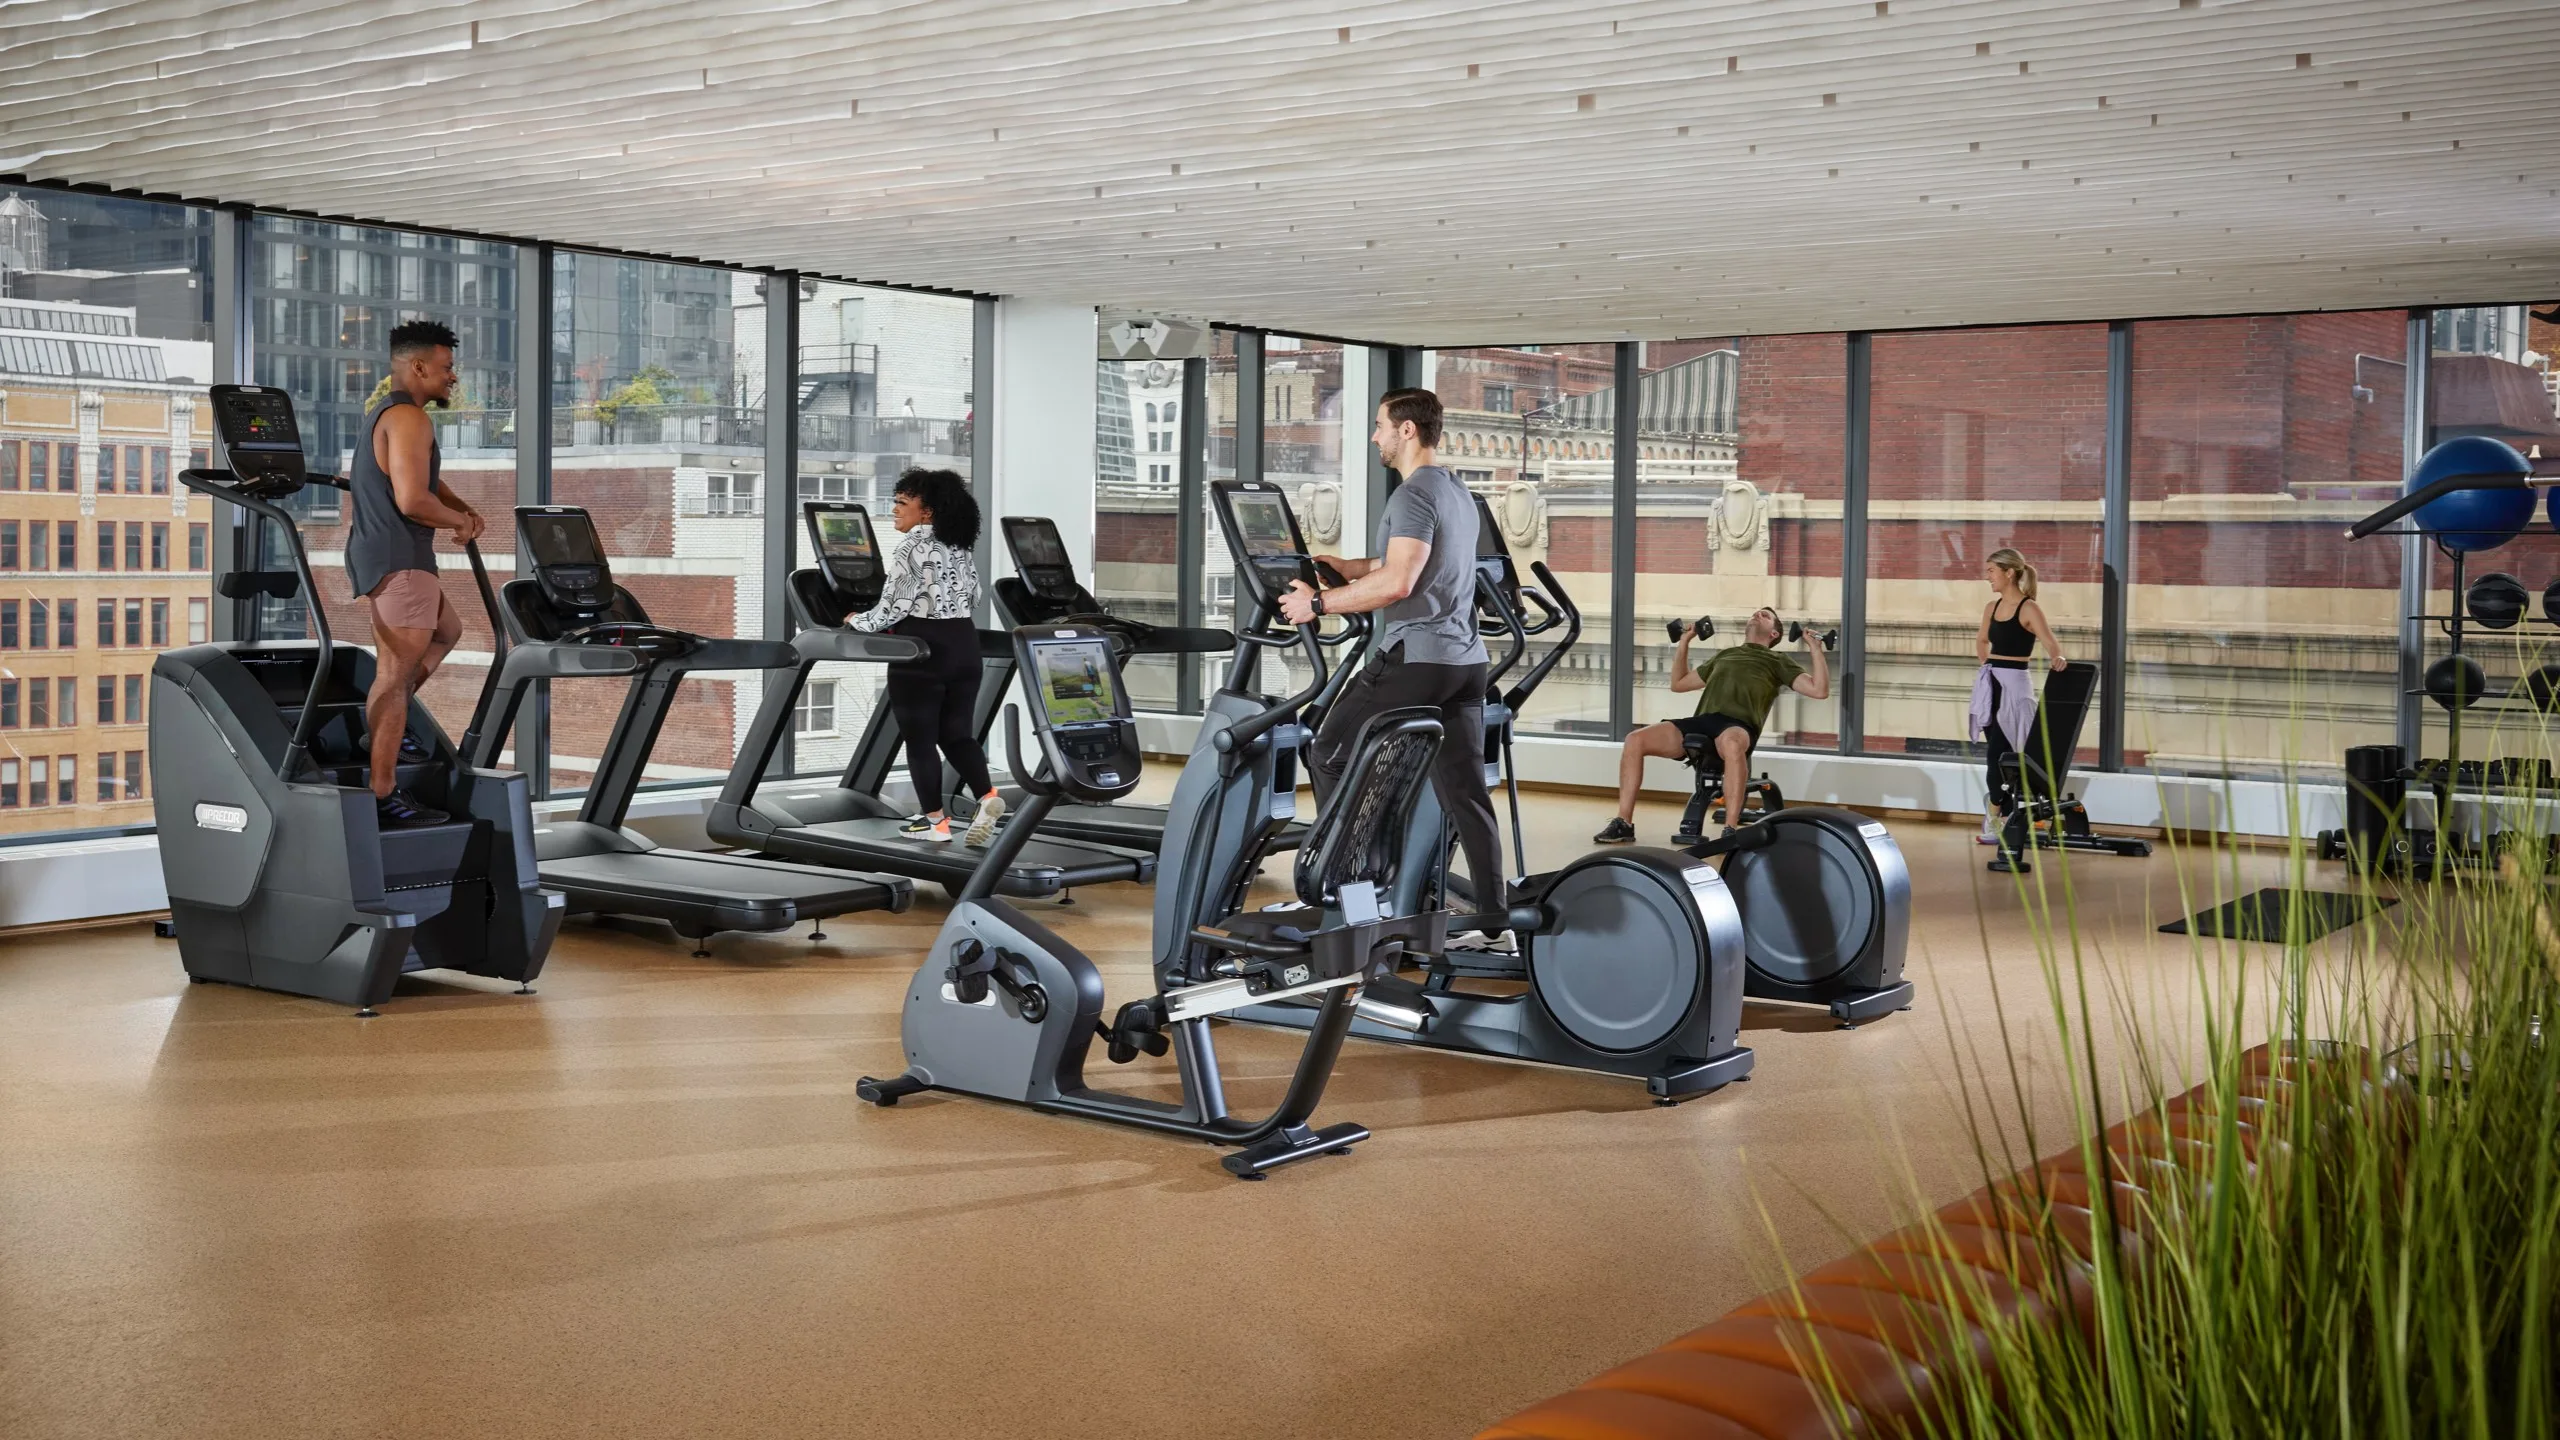 Precor cardio and strength equipment in a gym